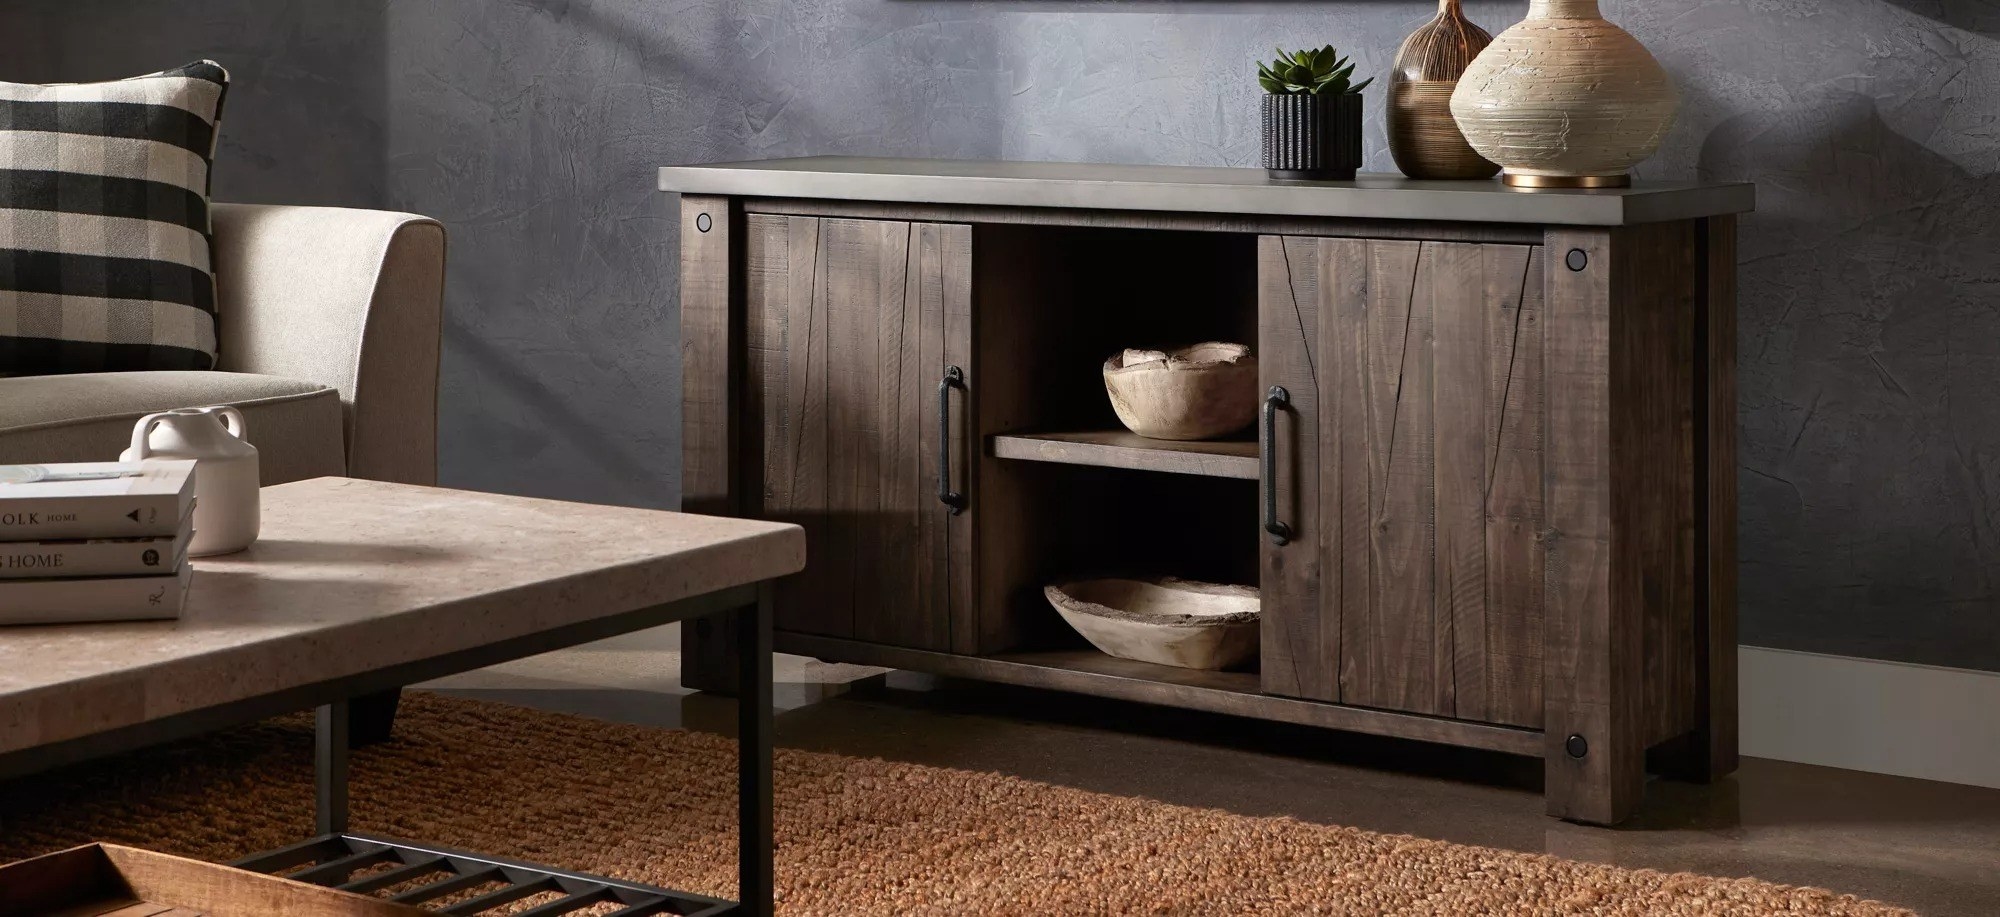 a brown wood horizontal console table with a door at either end and open shelves in the middle